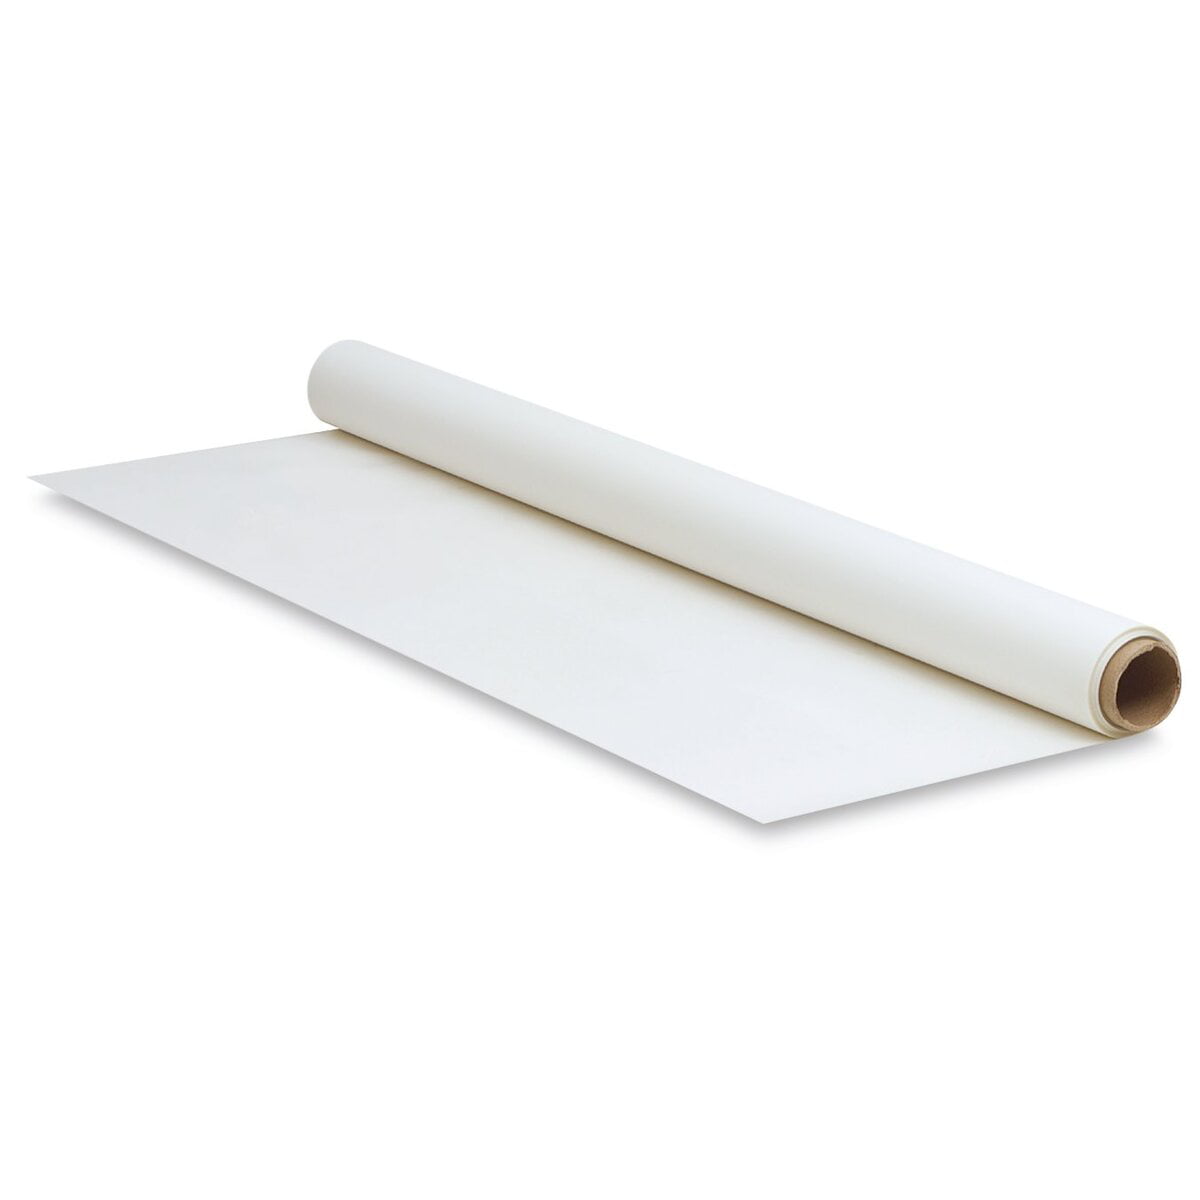 Drafting Polyester Film 3 Mil Double Matte Mylar 18 X 24 100 sheets